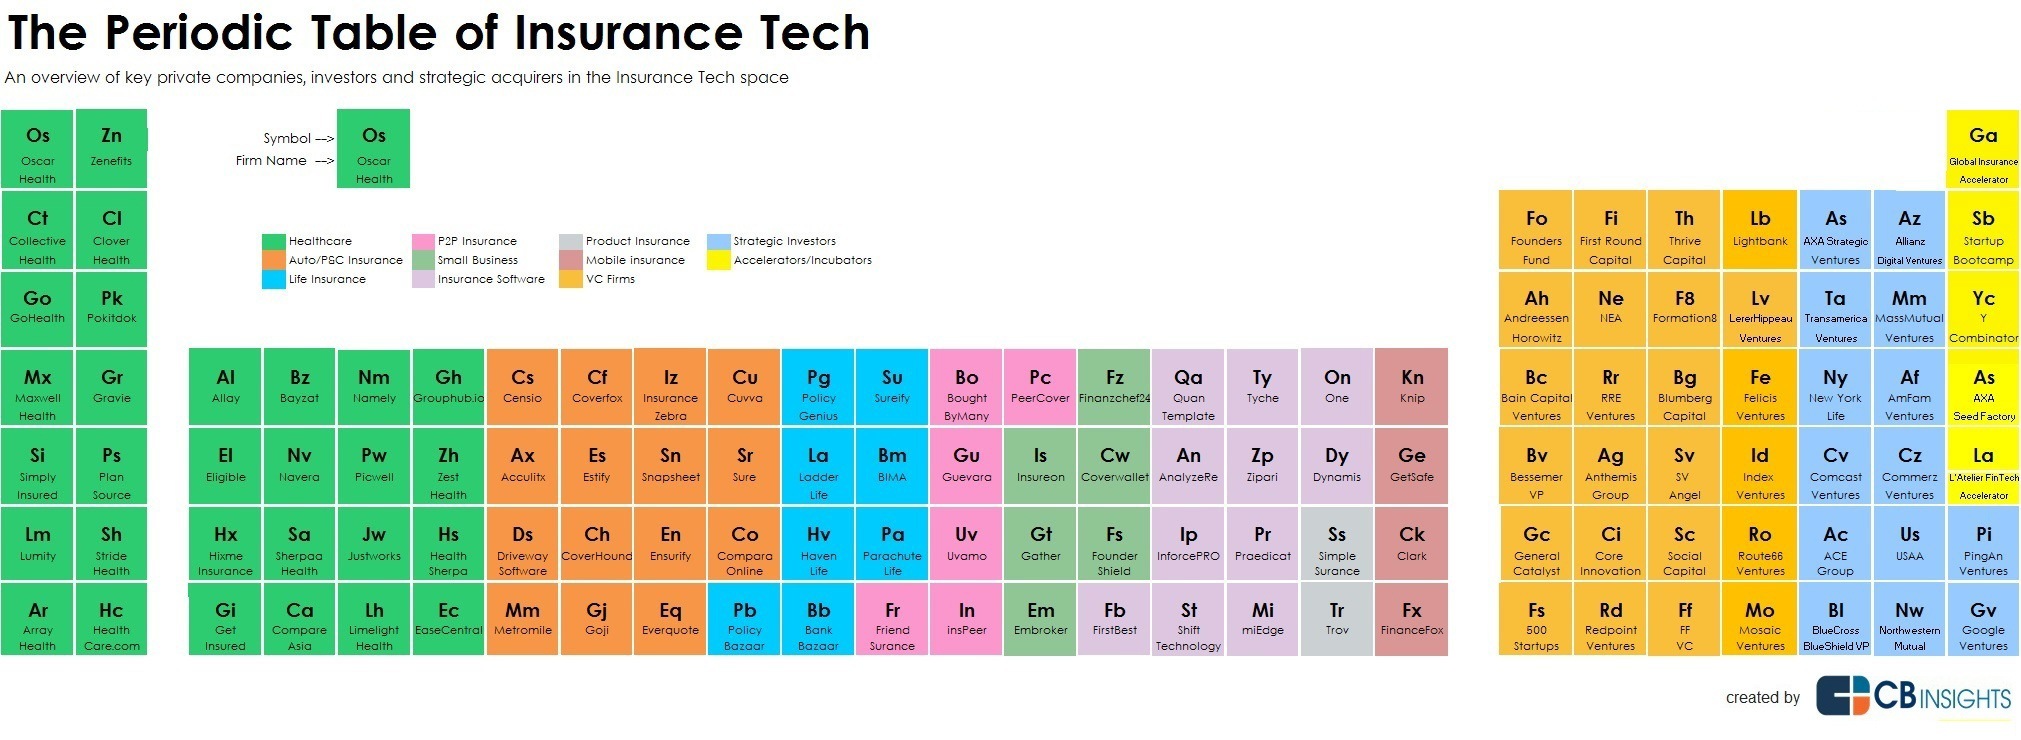 Periodic Table of Insurance Tech